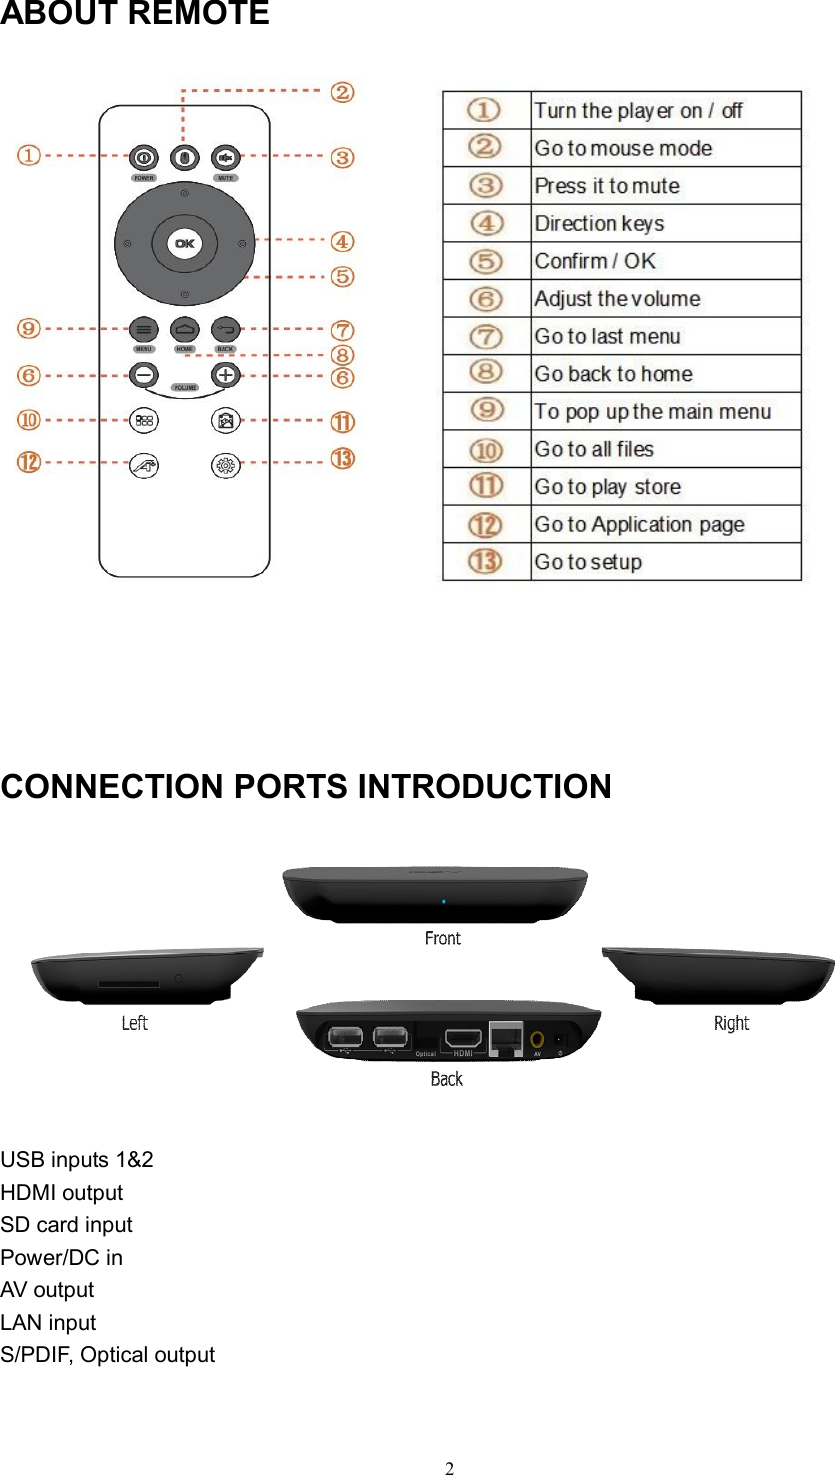   2ABOUT REMOTE                   CONNECTION PORTS INTRODUCTION         USB inputs 1&amp;2 HDMI output SD card input Power/DC in   AV output LAN input S/PDIF, Optical output   